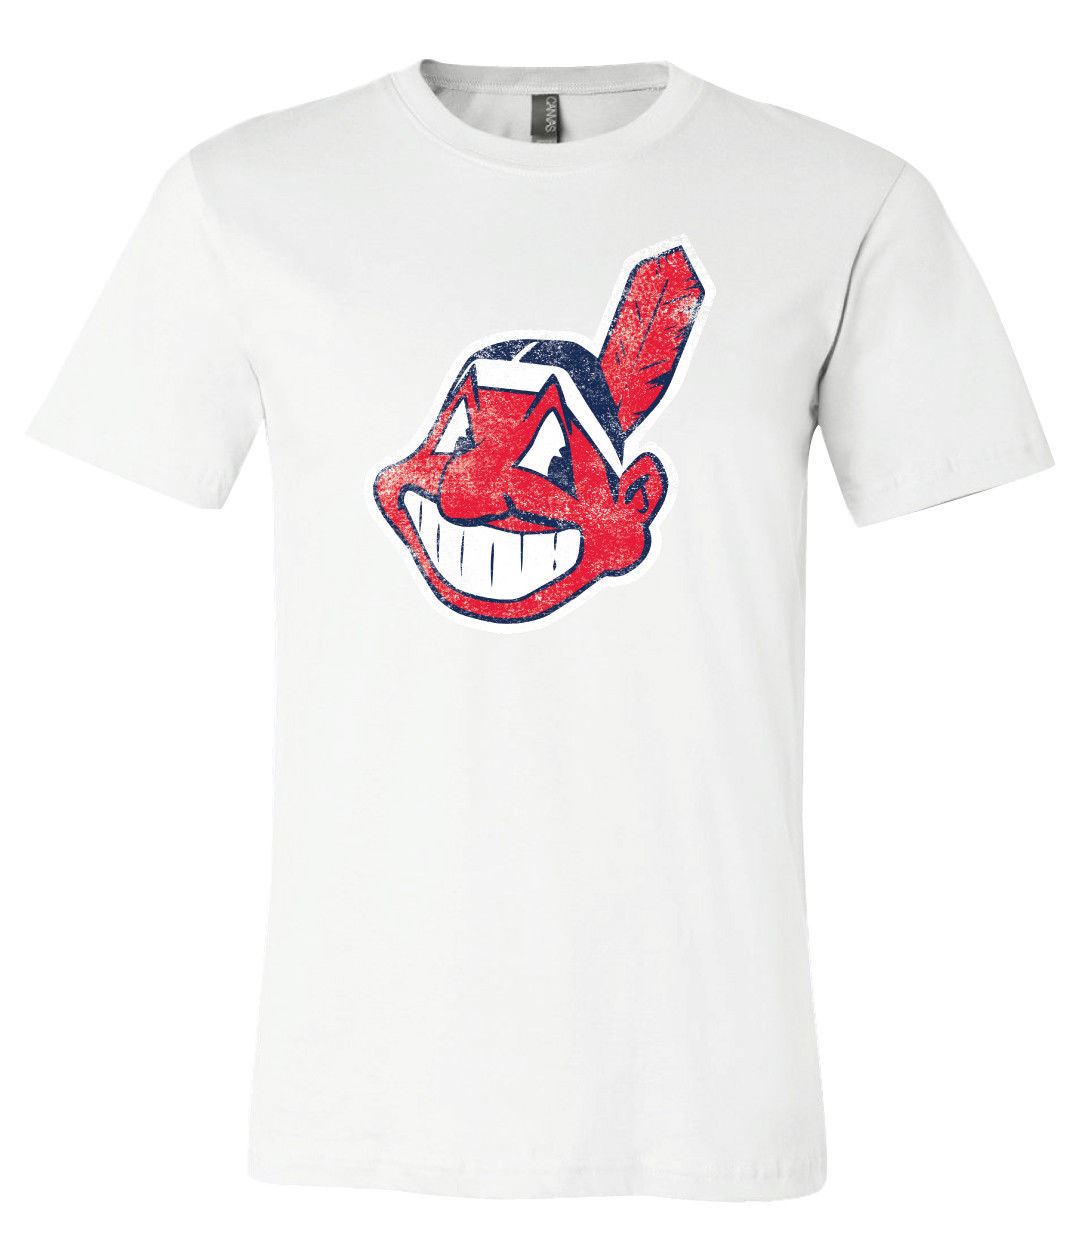 Cleveland Indians Mascot Chief Wahoo Distressed Vintage logo T